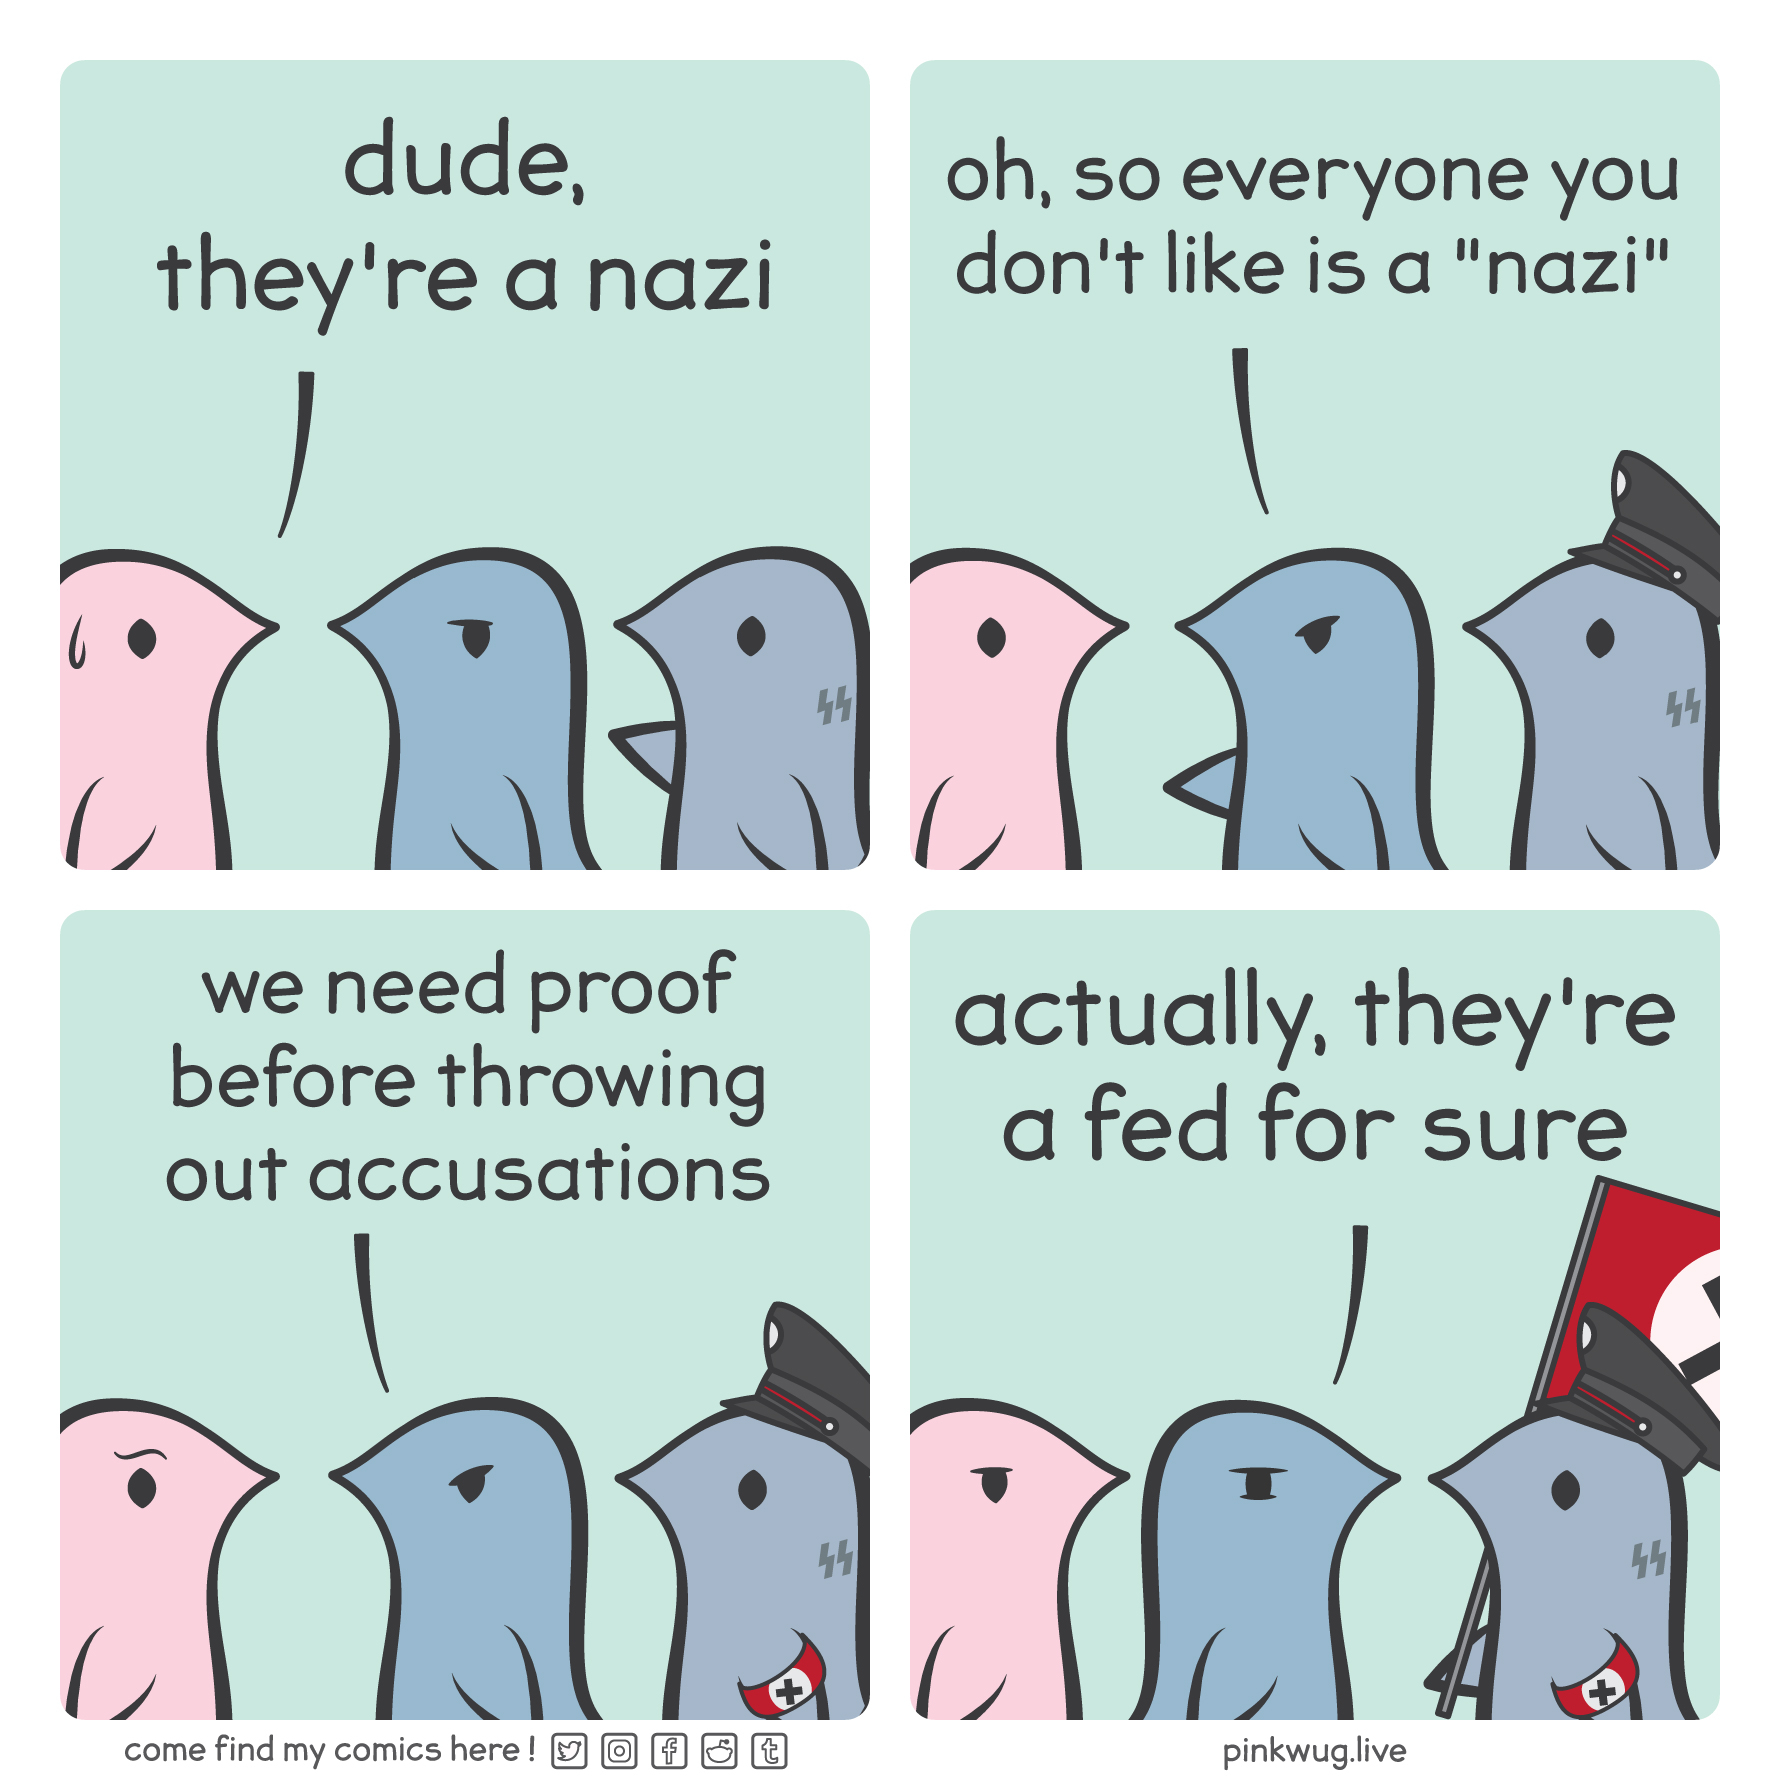 pinkwug comic: Panel 1: A pink wug looks at a grey wug with SS tattoos doing the roman salute and says: "dude, they're a nazi"

Panel 2: A dark blue wug gets in between them and says: "oh so everyone you don't like is a nazi". The grey wug now has a military hat

Panel 3: The dark blue wug continues: "we need proof before throwing out accusations". The grey wug now has a nazi armband

Panel 4: The dark blue wug turns around and says: "actually, they're a fed for sure"